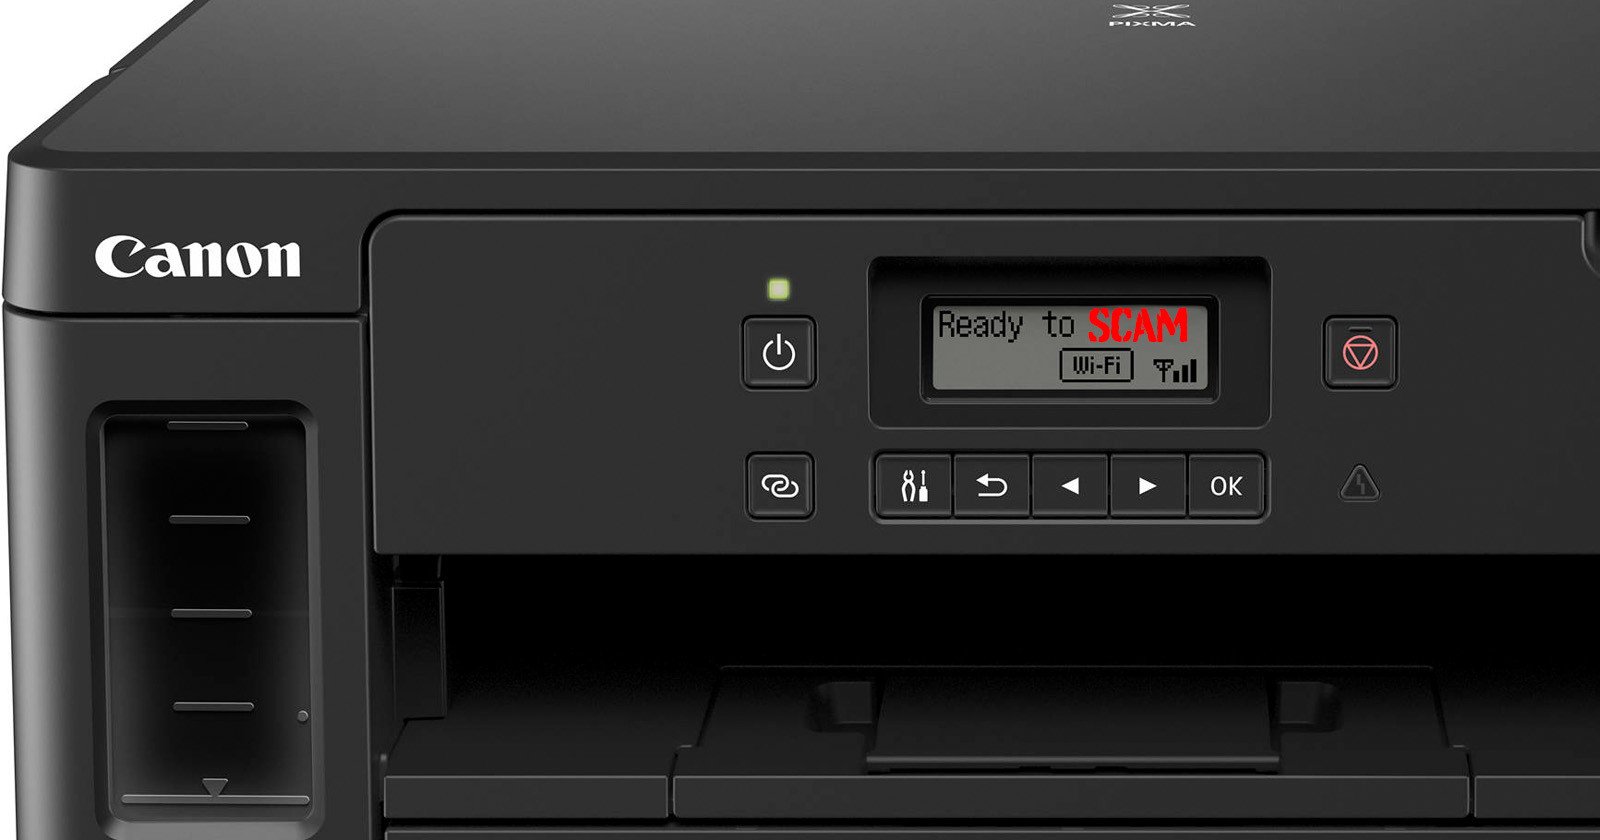 Fake Canon Customer Service Websites Are Scamming Printer Owners